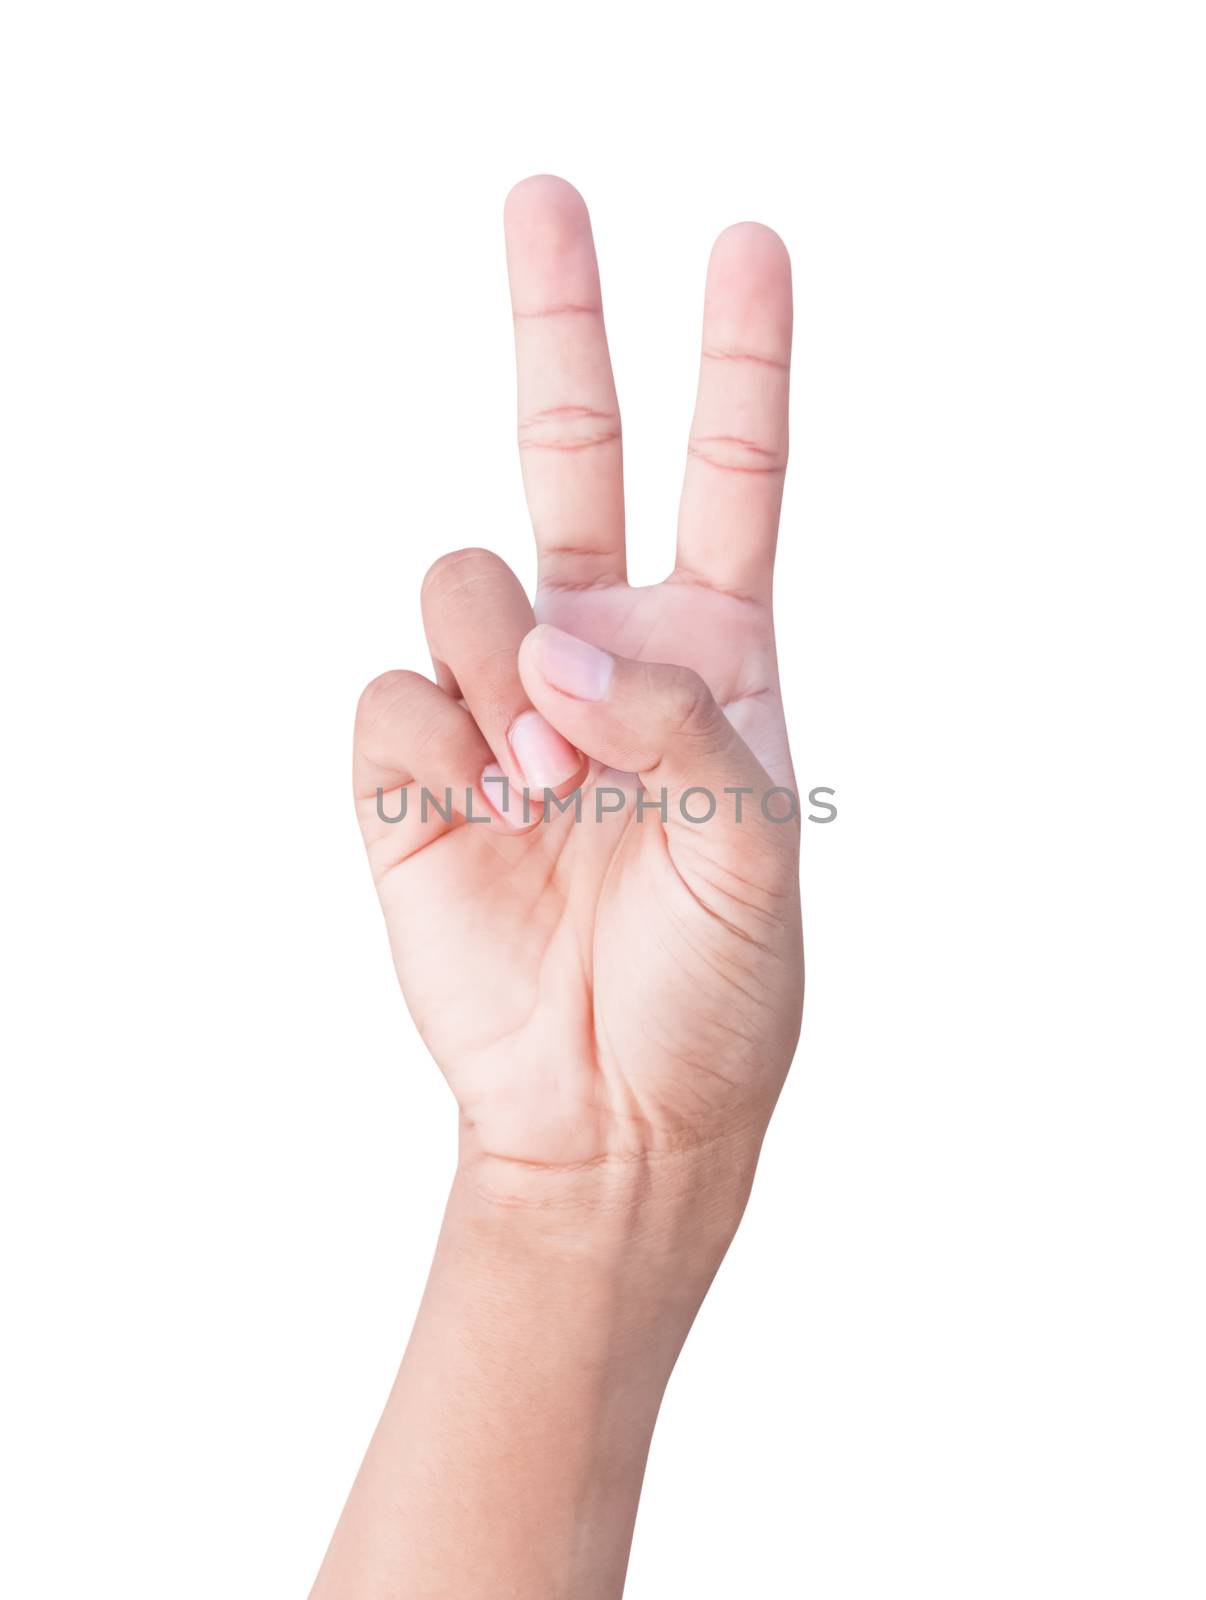 hand number two symbol showing on white background by pramot